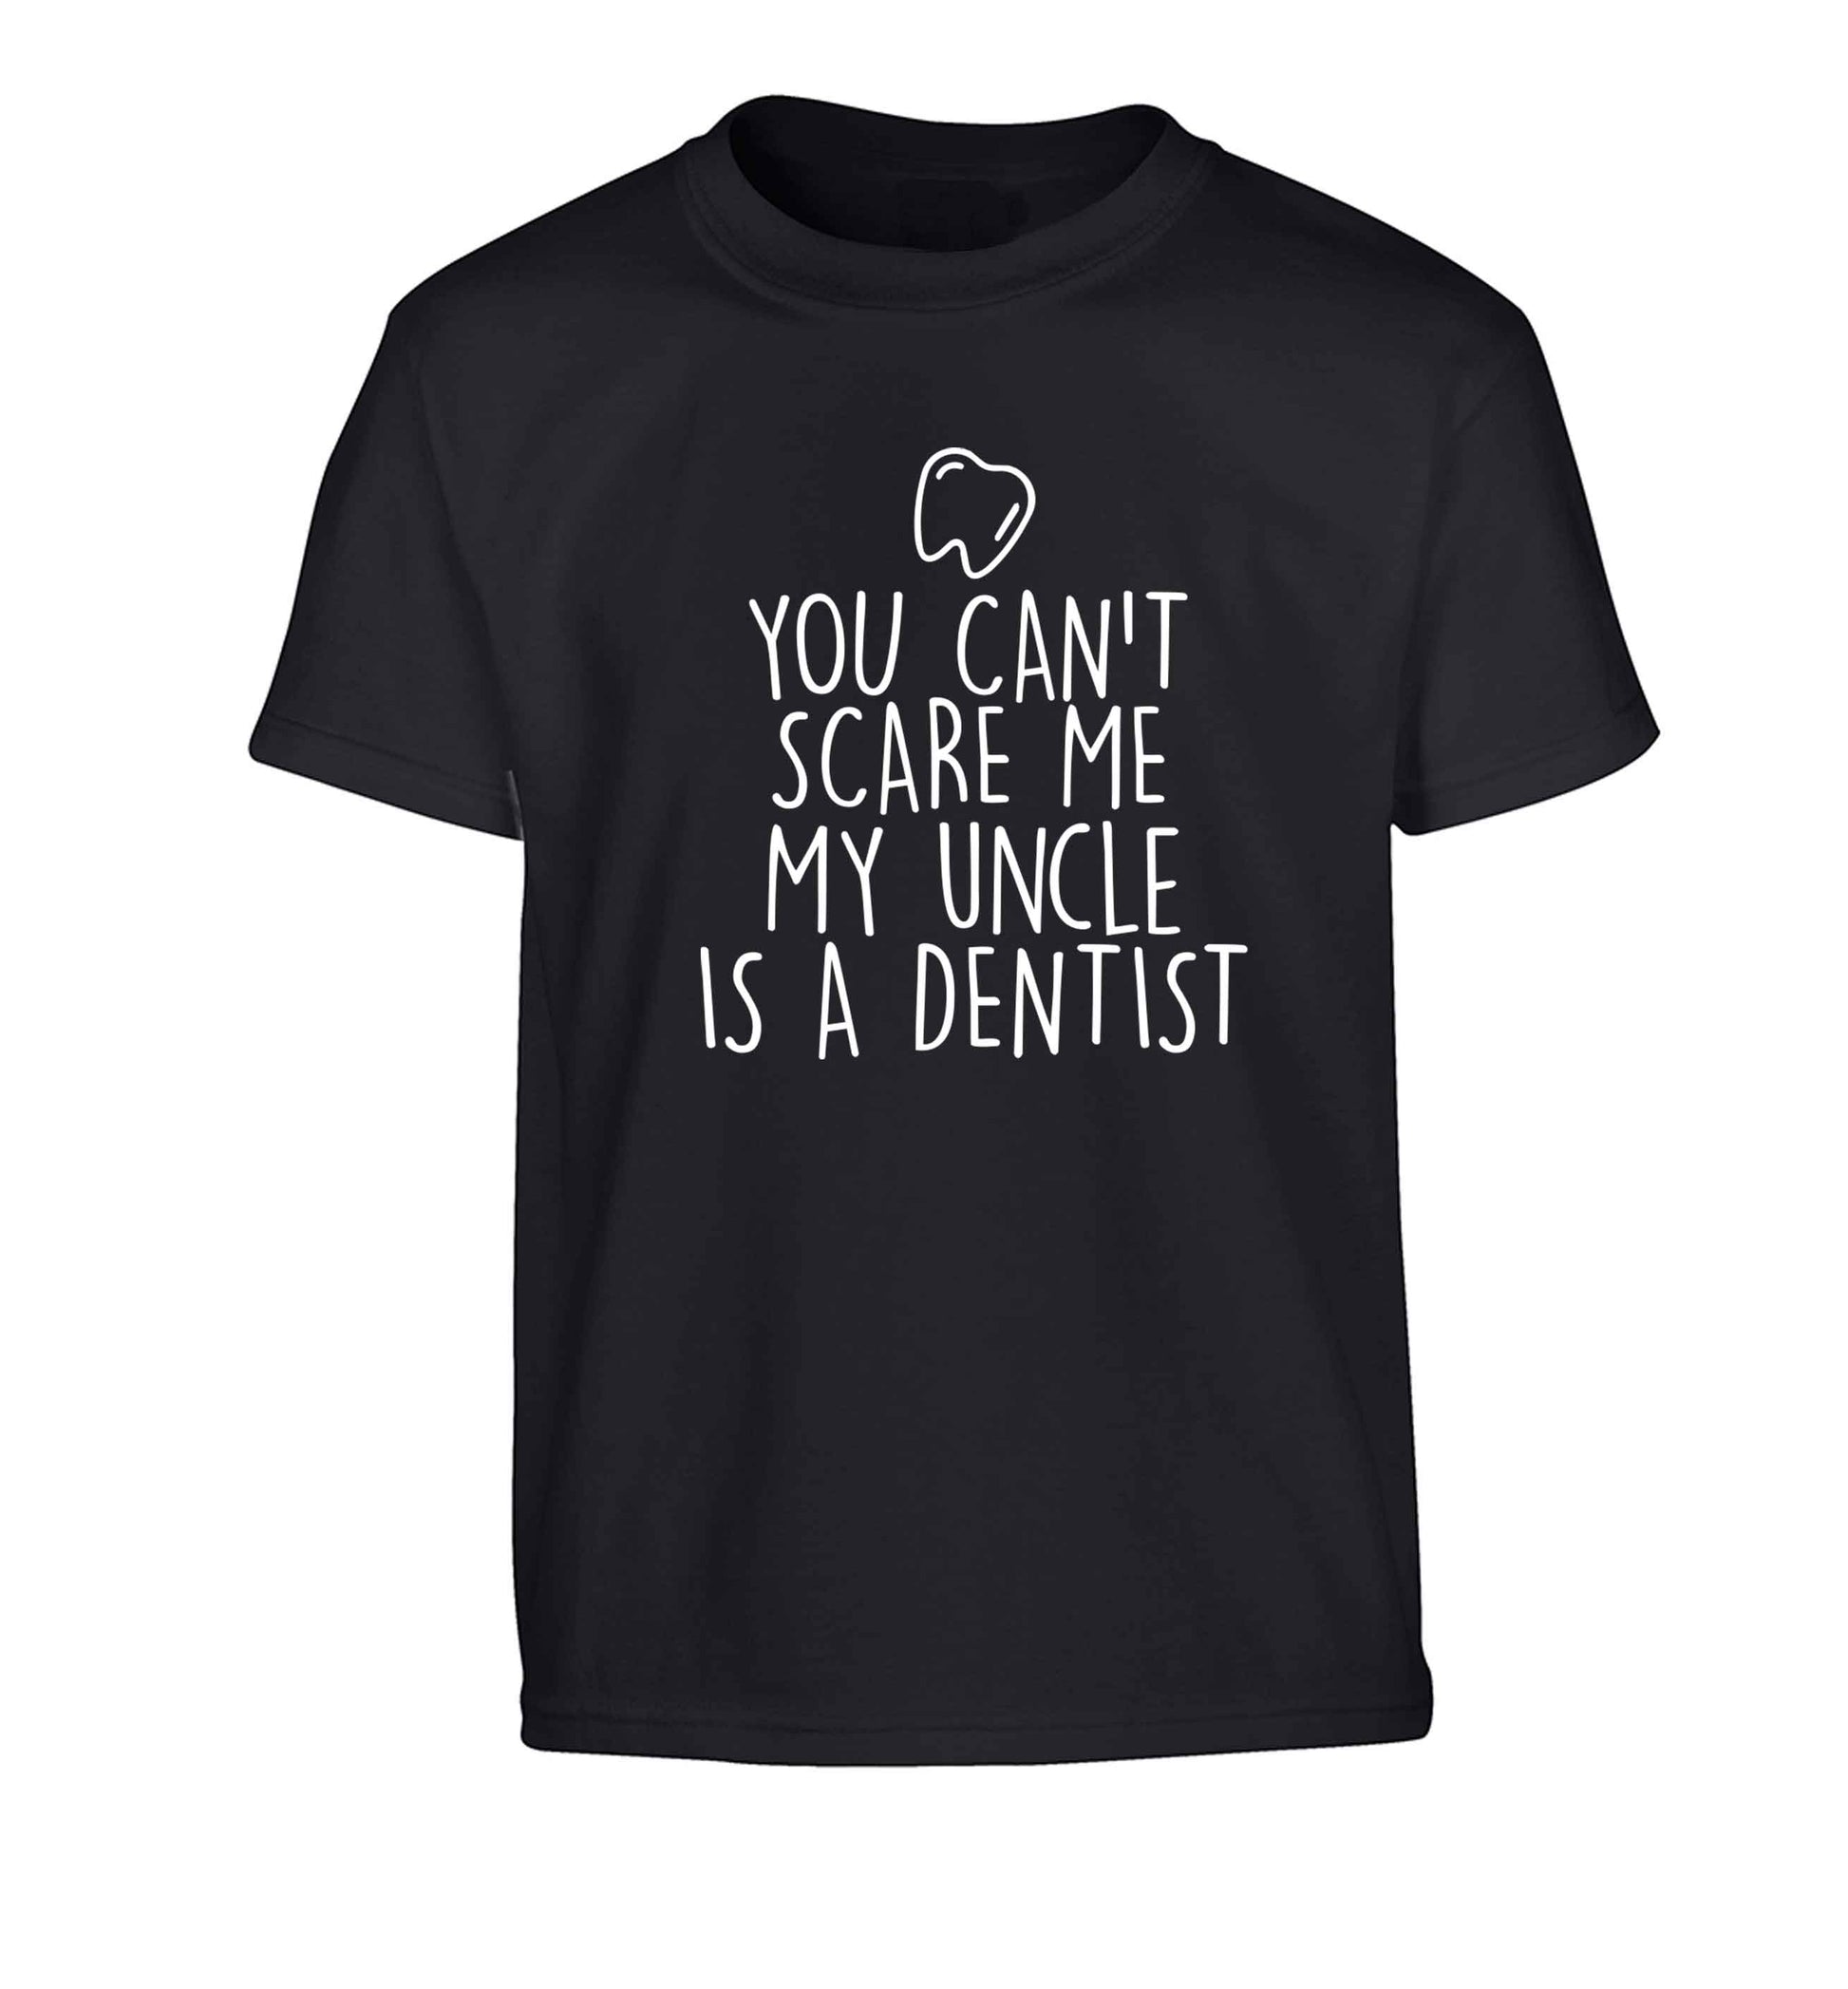 You can't scare me my uncle is a dentist Children's black Tshirt 12-13 Years